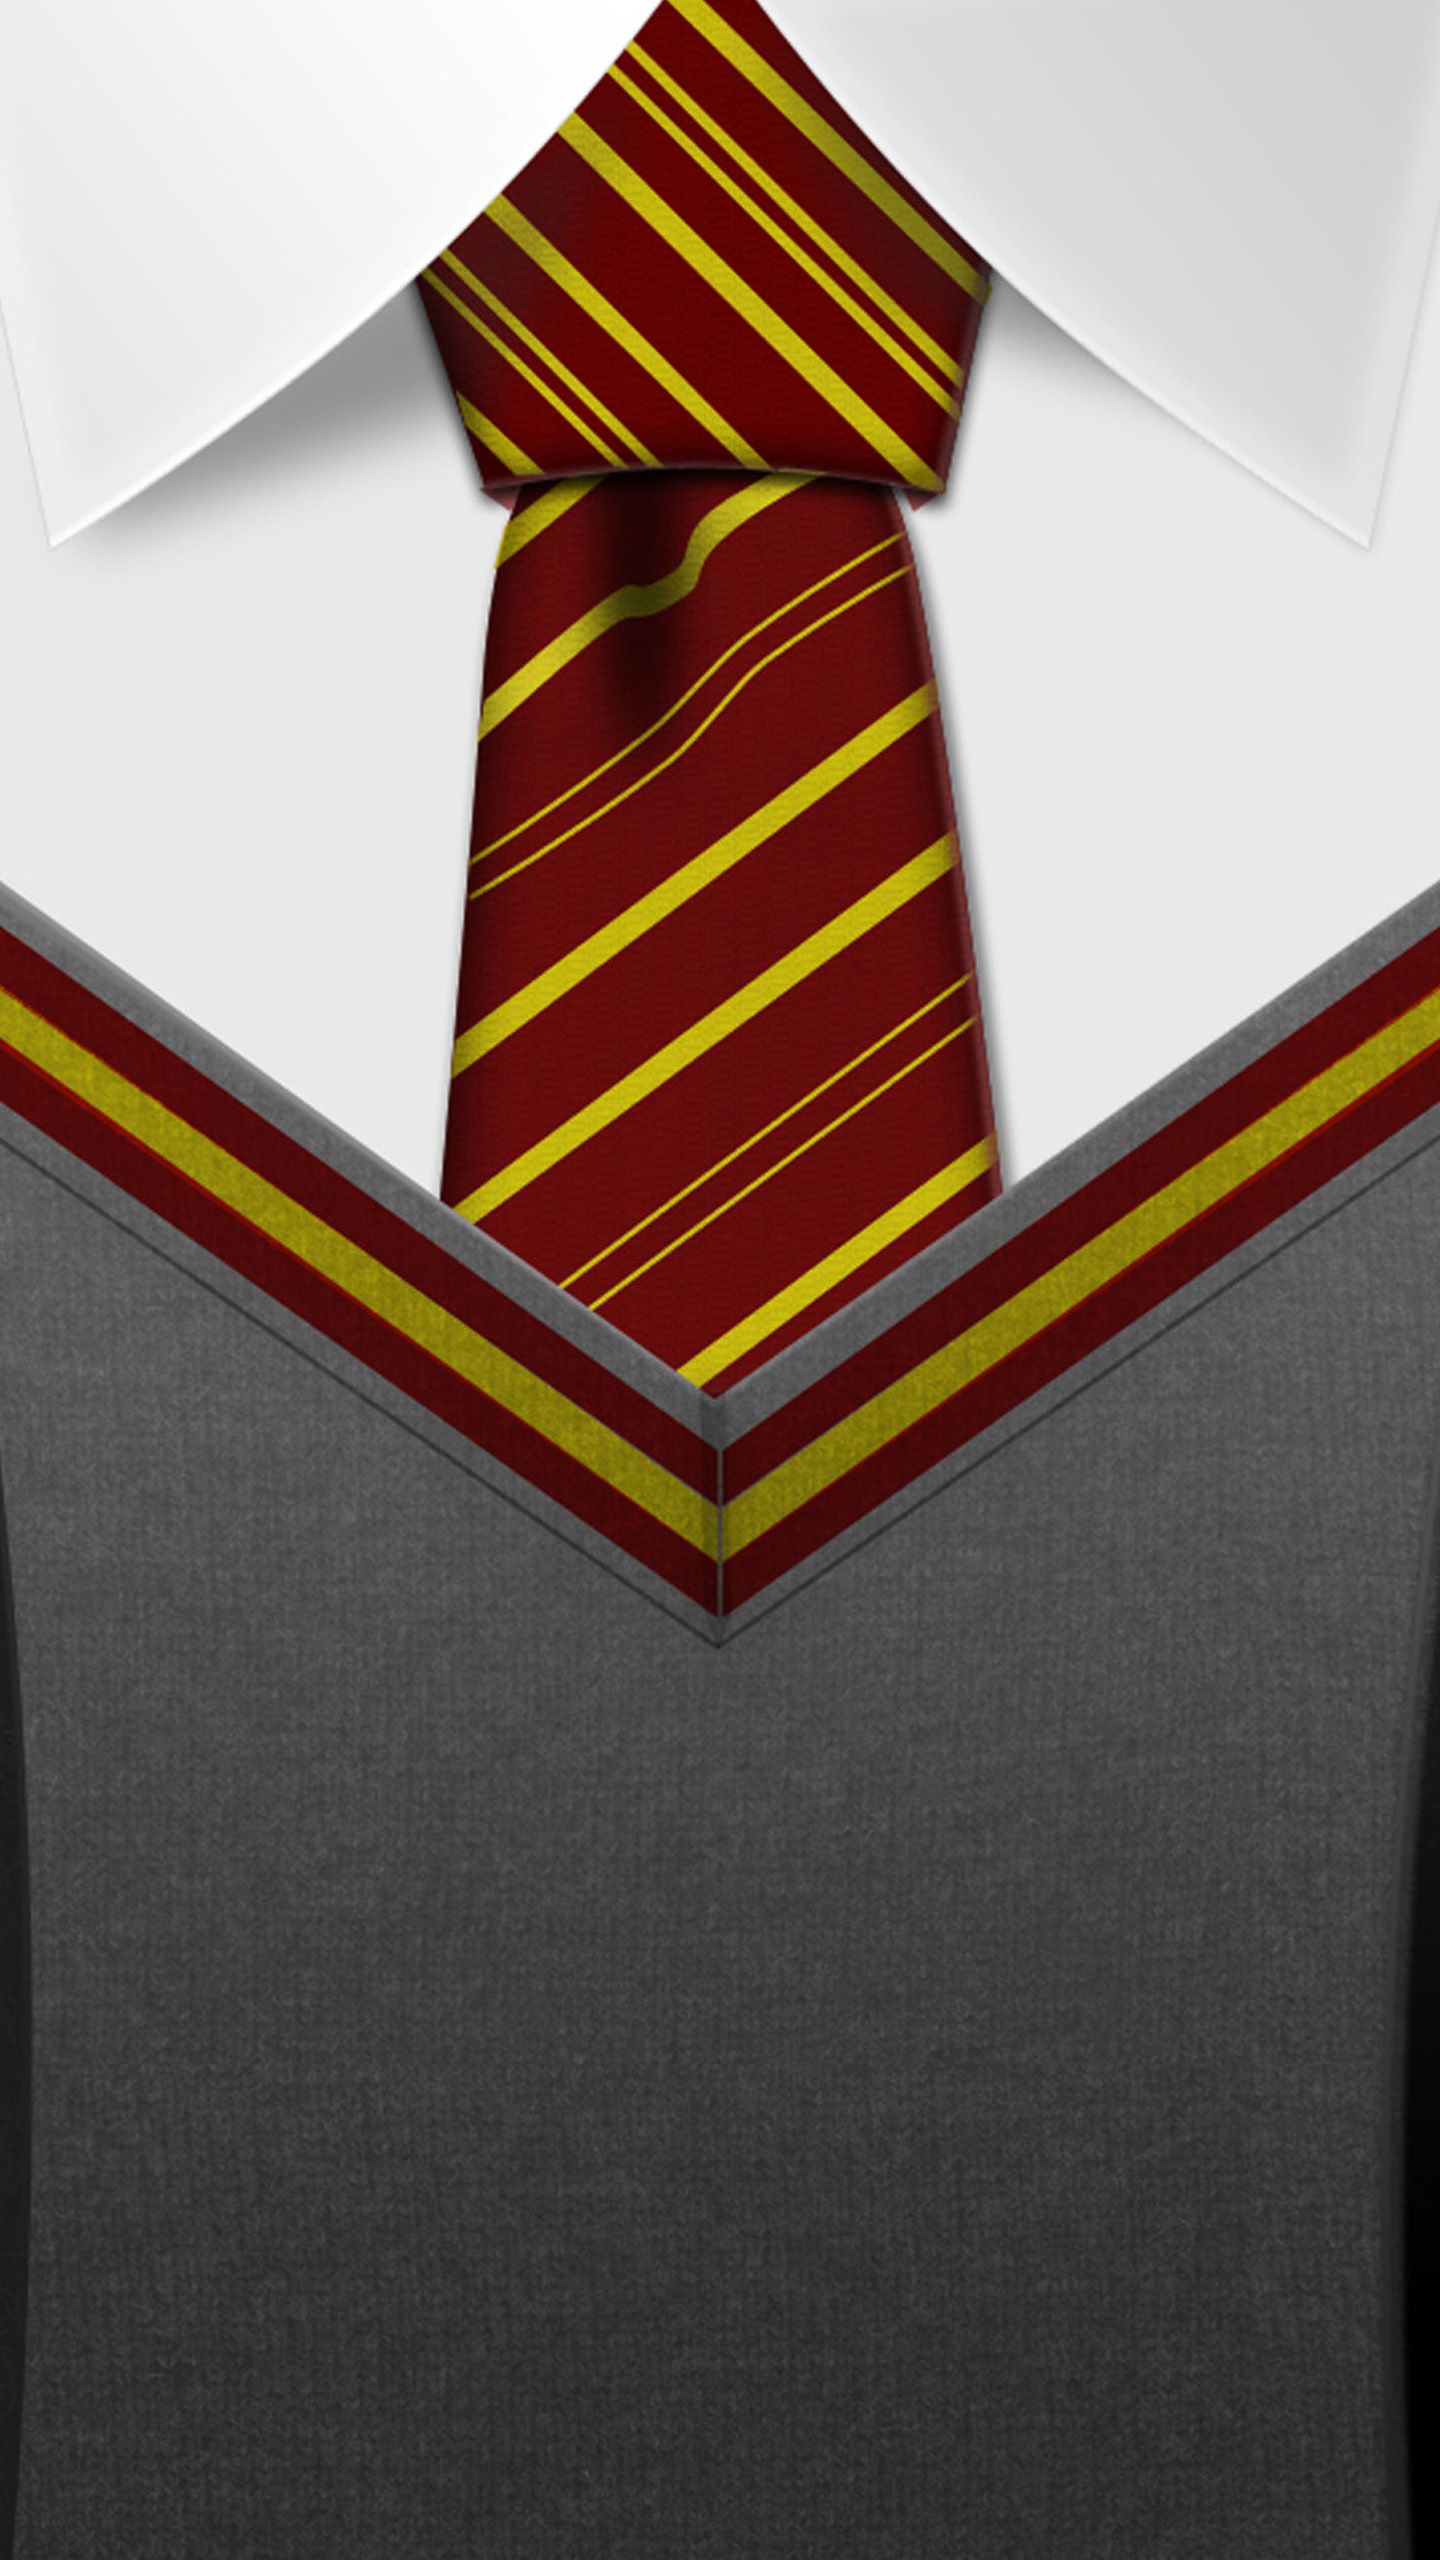 HTC One ME Wallpaper: Harry Potter Tie Android Wallpaper